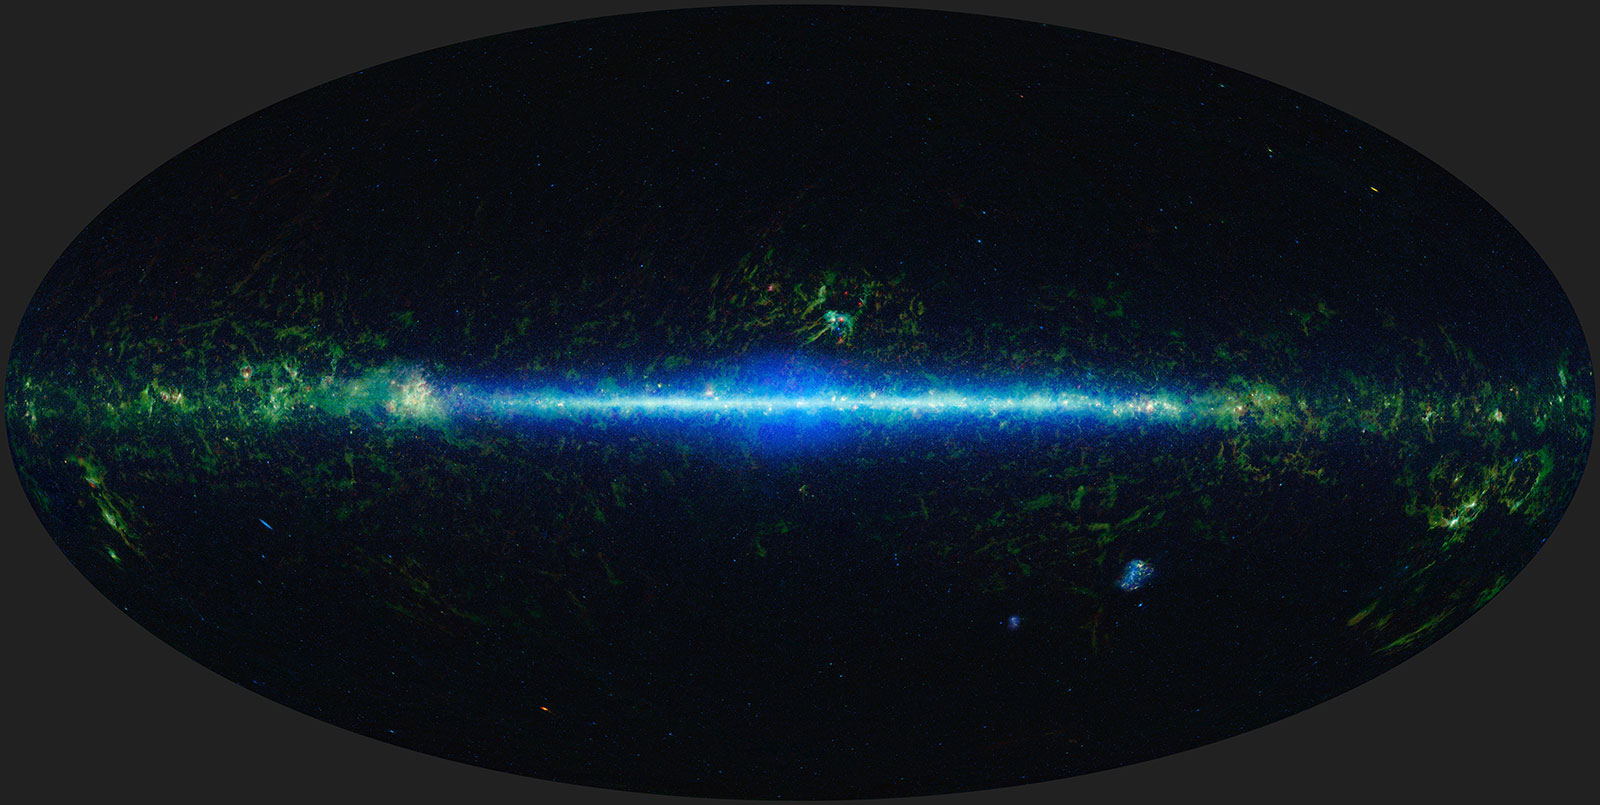 This mosaic shows the entire sky imaged by the Wide-field Infrared Survey Explorer (WISE)